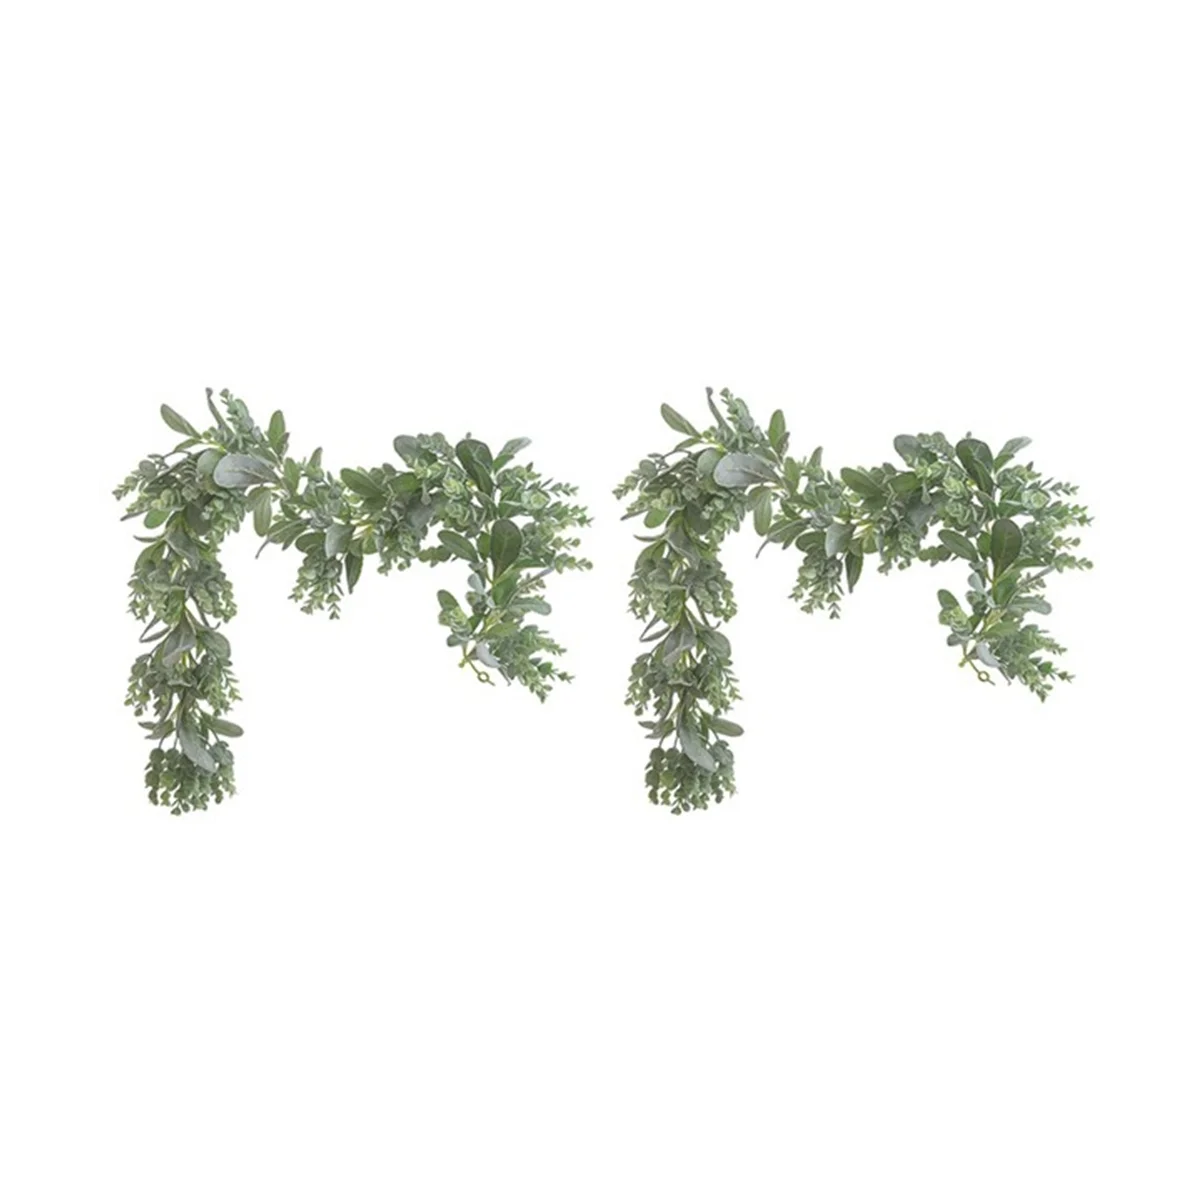 

2Pc Lambs Ear Garland Greenery and Eucalyptus Vine / 38 Inches Long/Light Colored Flocked Leaves/Soft and Drapey Wedding